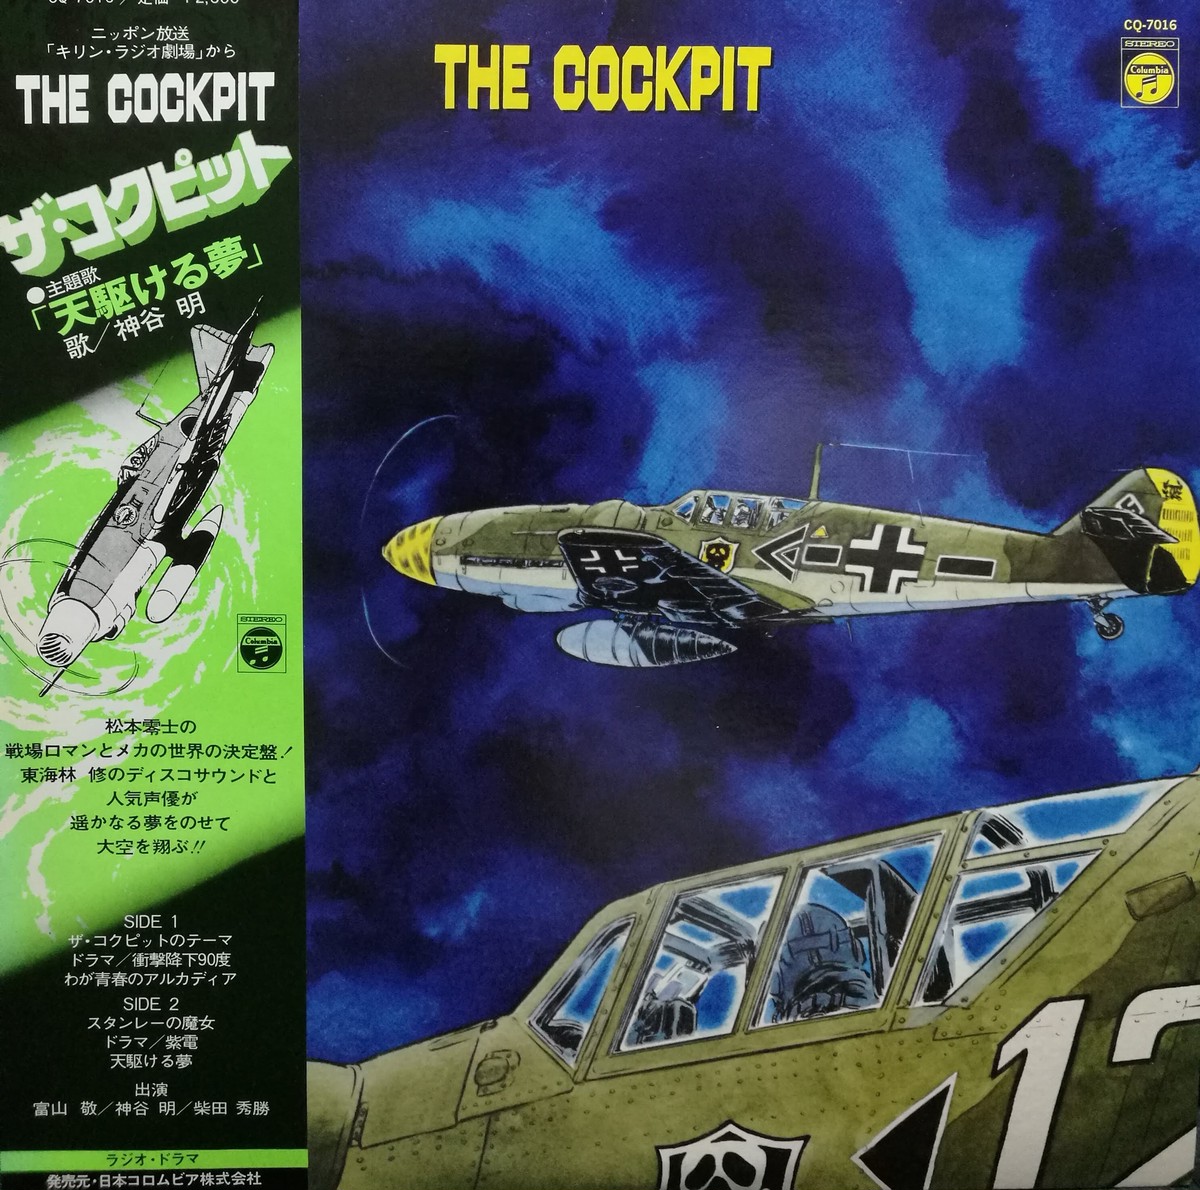 Lp Ost 東海林 修 The Cockpit ザ コクピット Compact Disco Asia